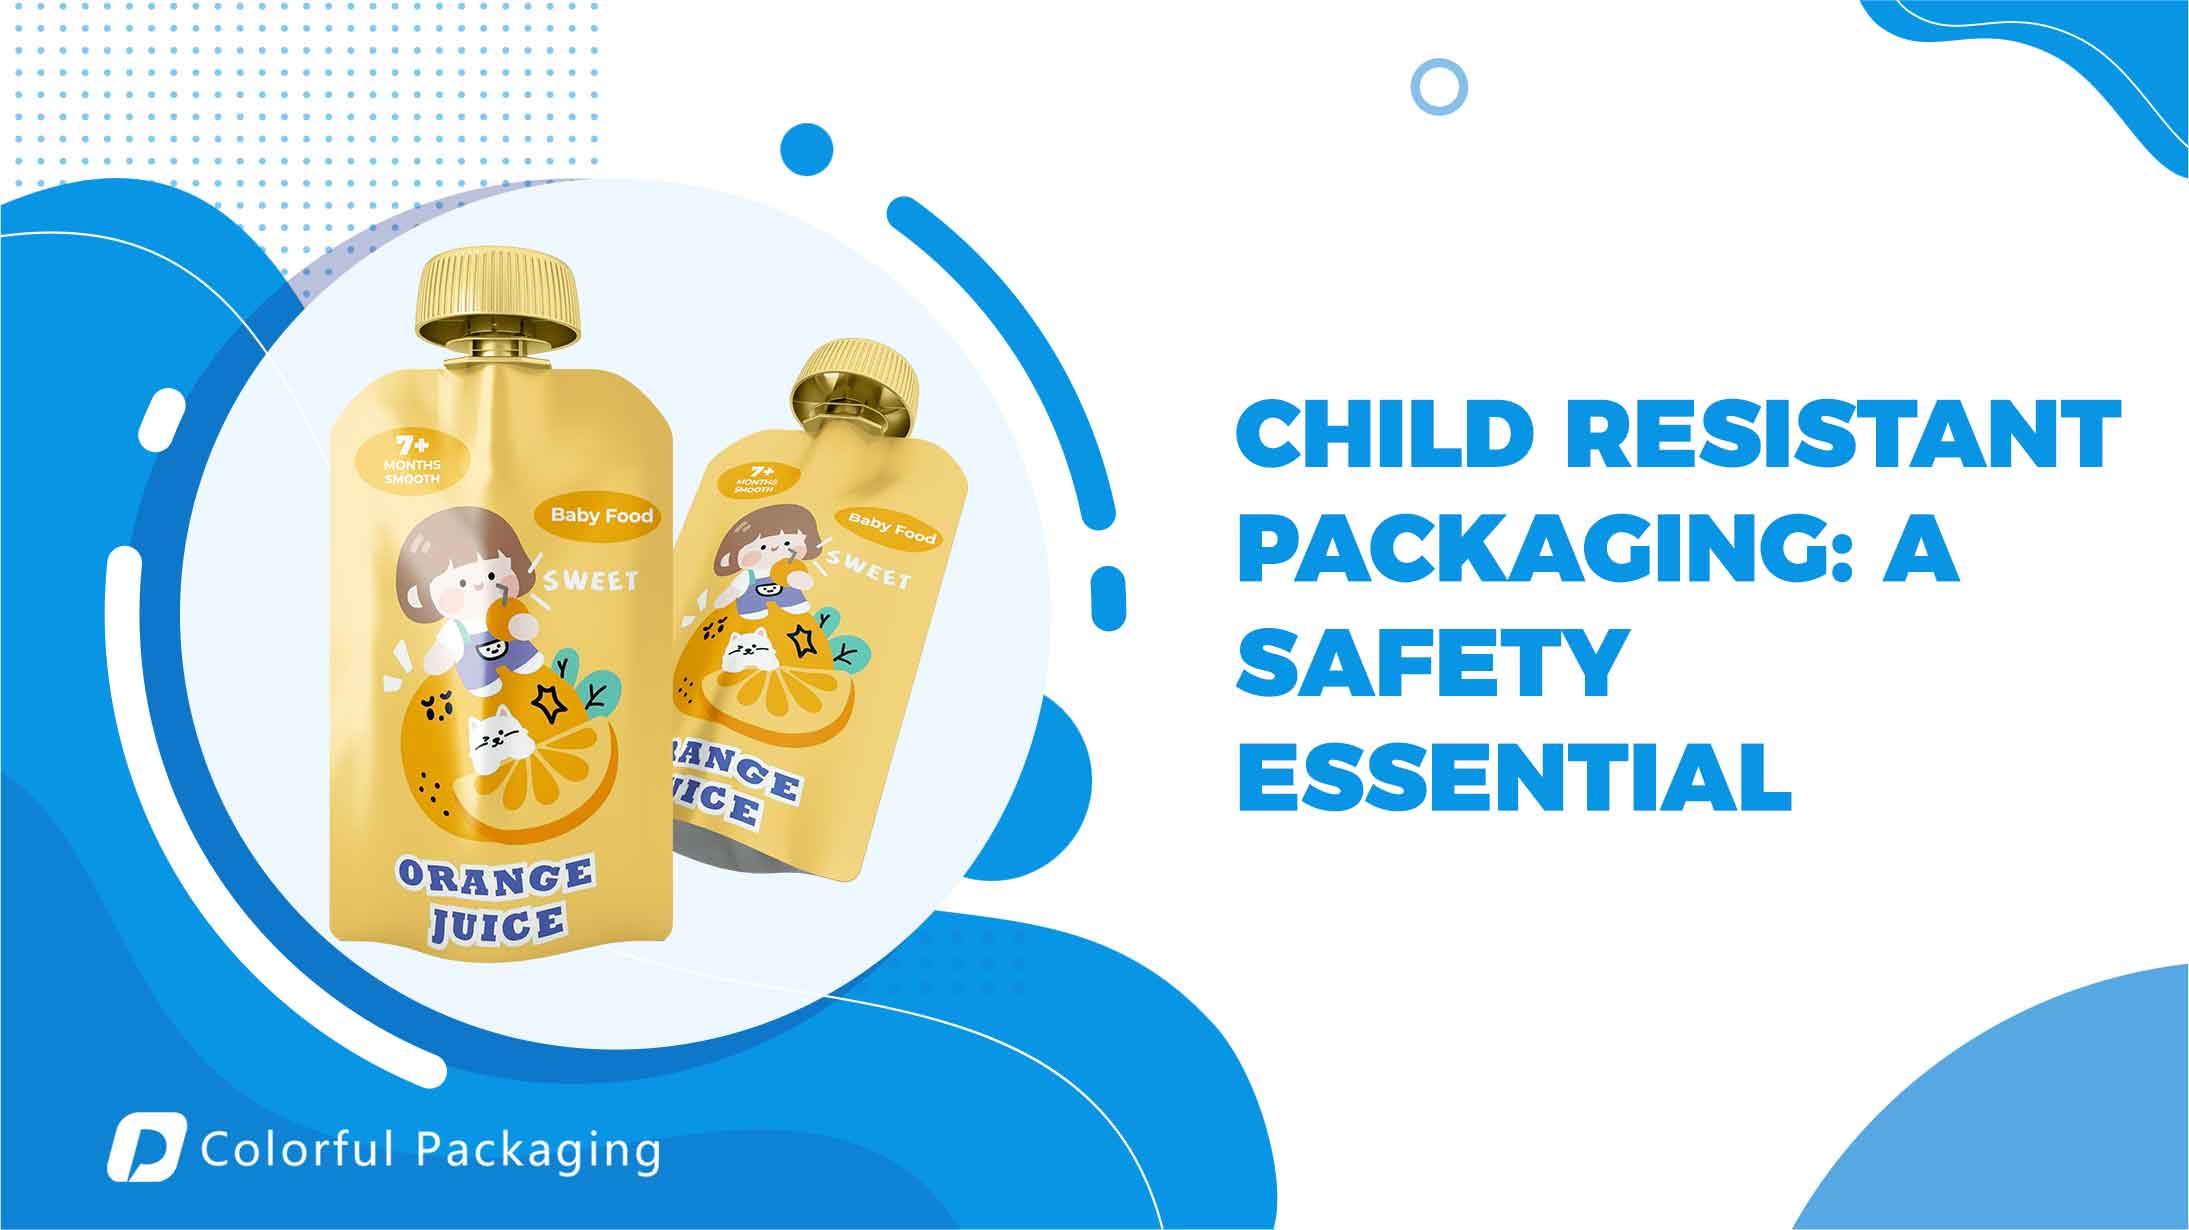 Child Resistant Packaging: A Safety Essential